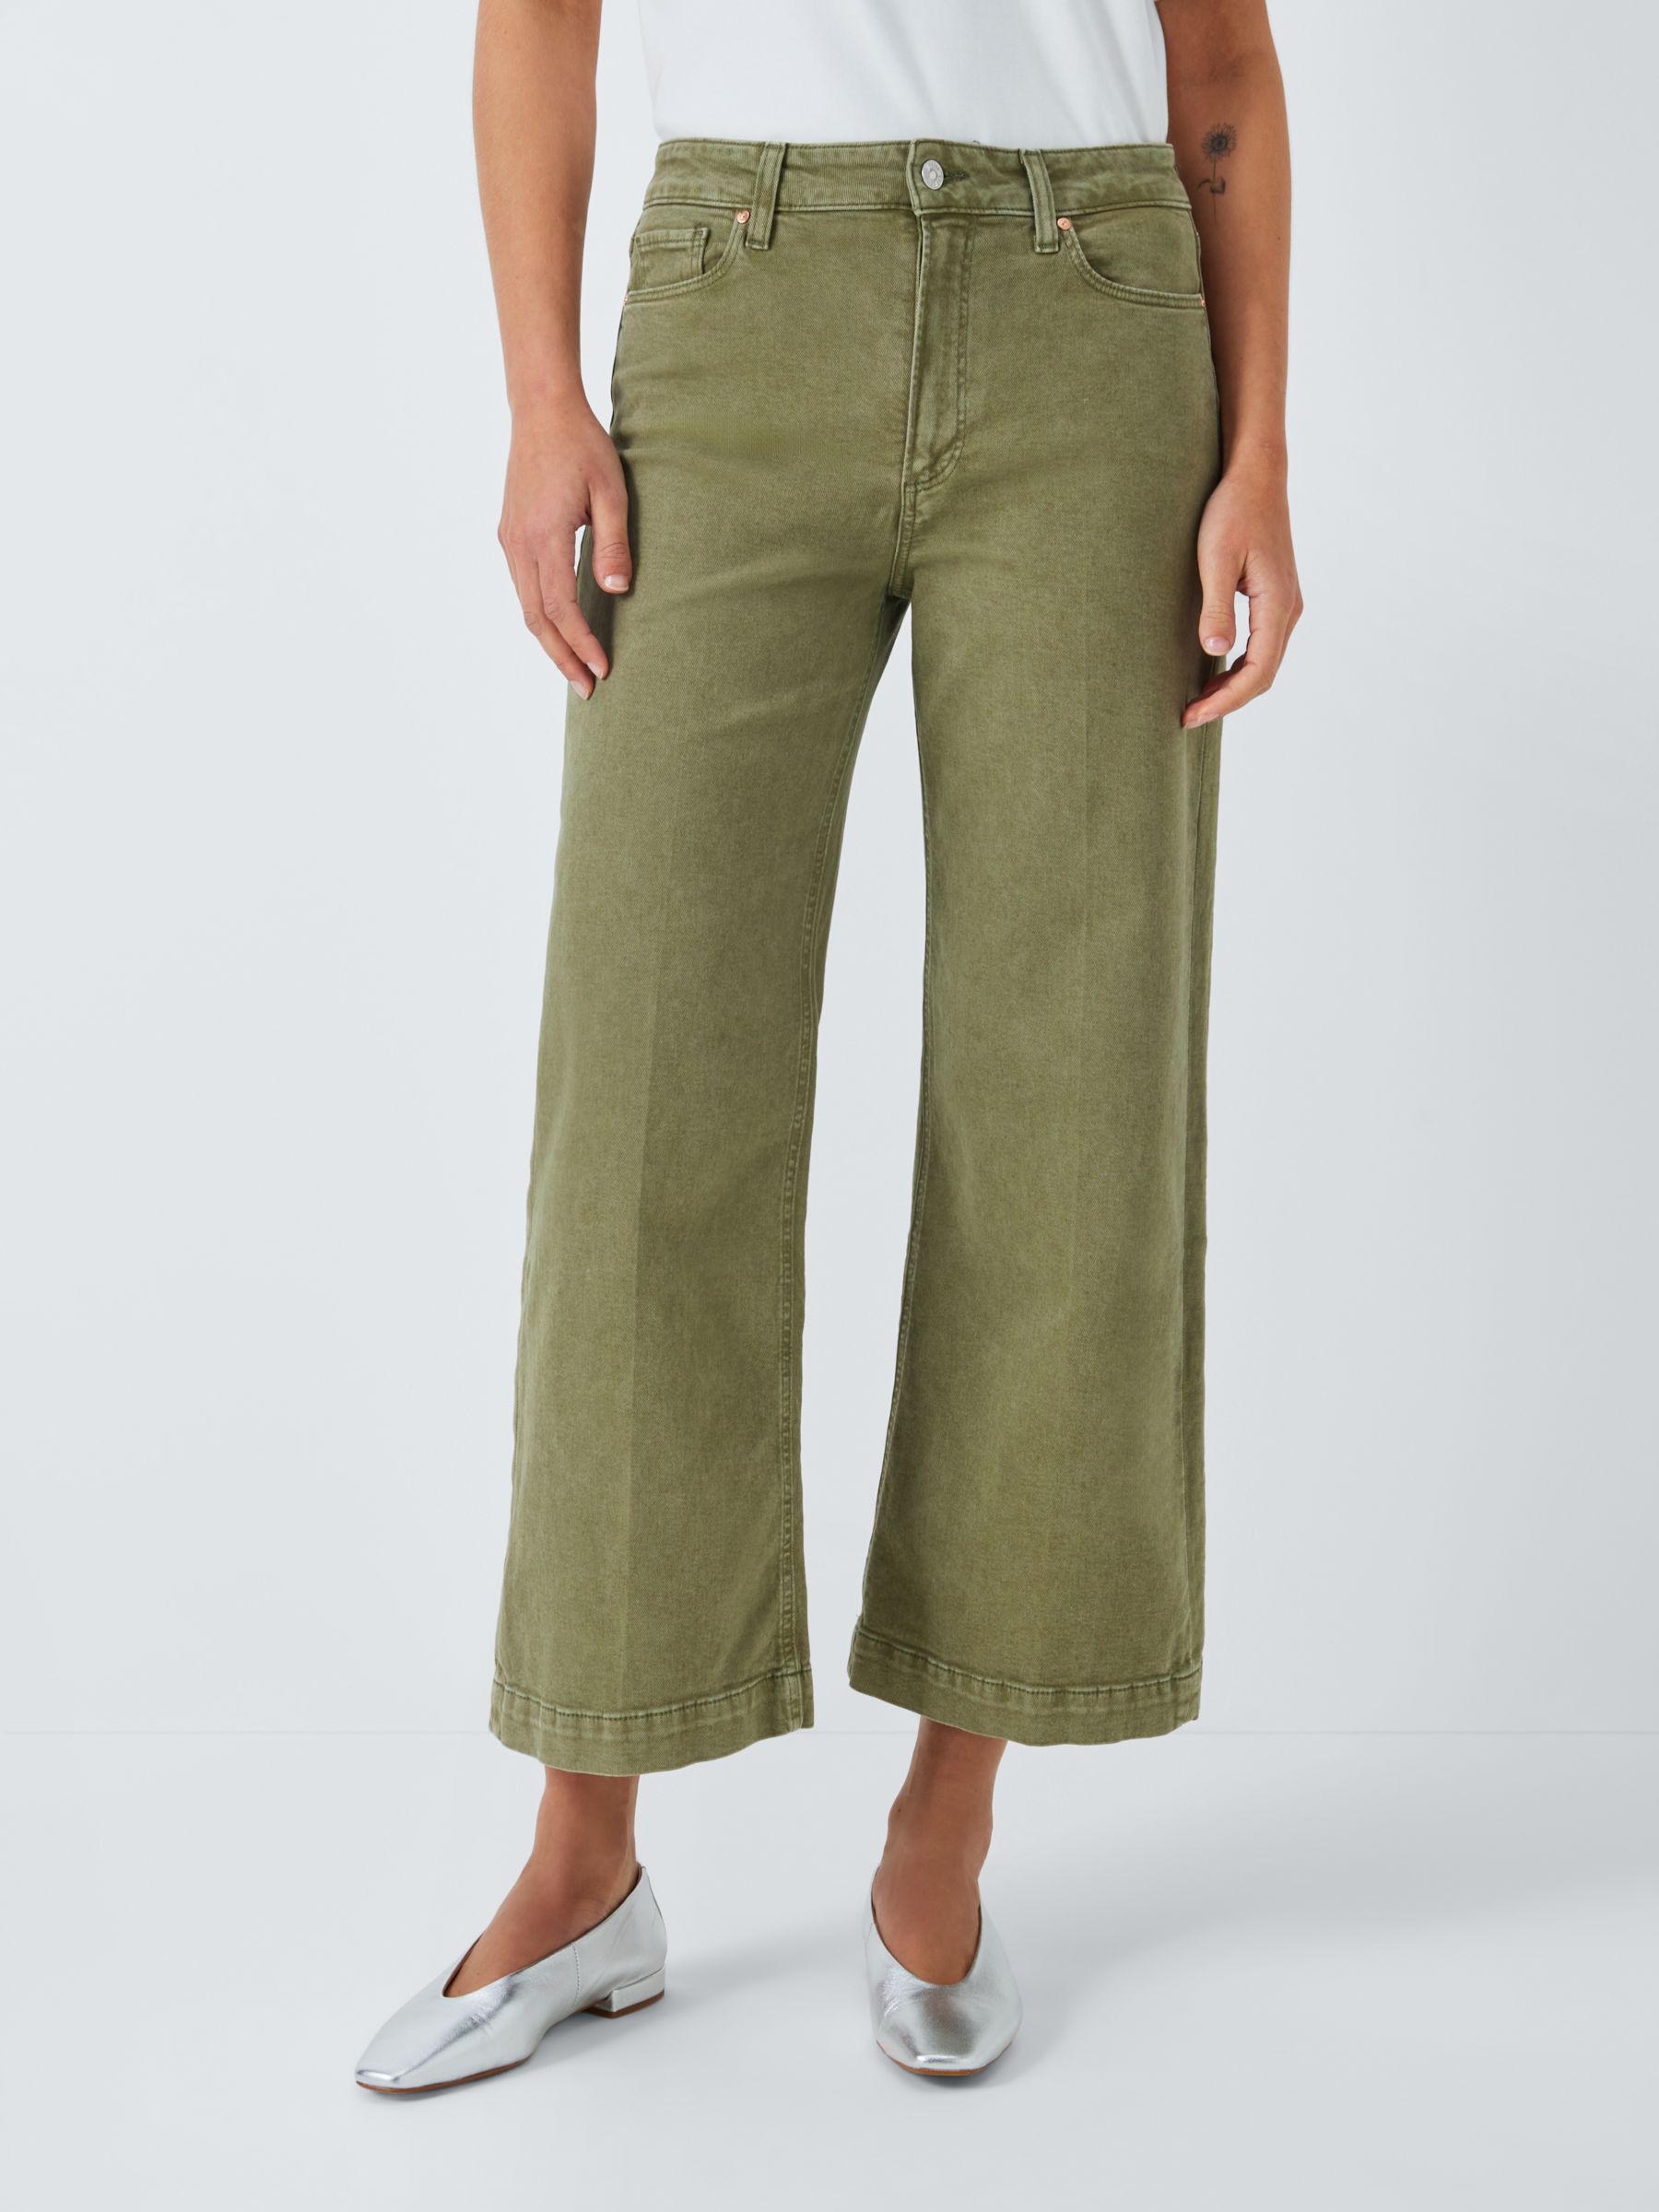 PAIGE Anessa Wide Leg Ankle Jeans, Vintage Mossy Green, 26